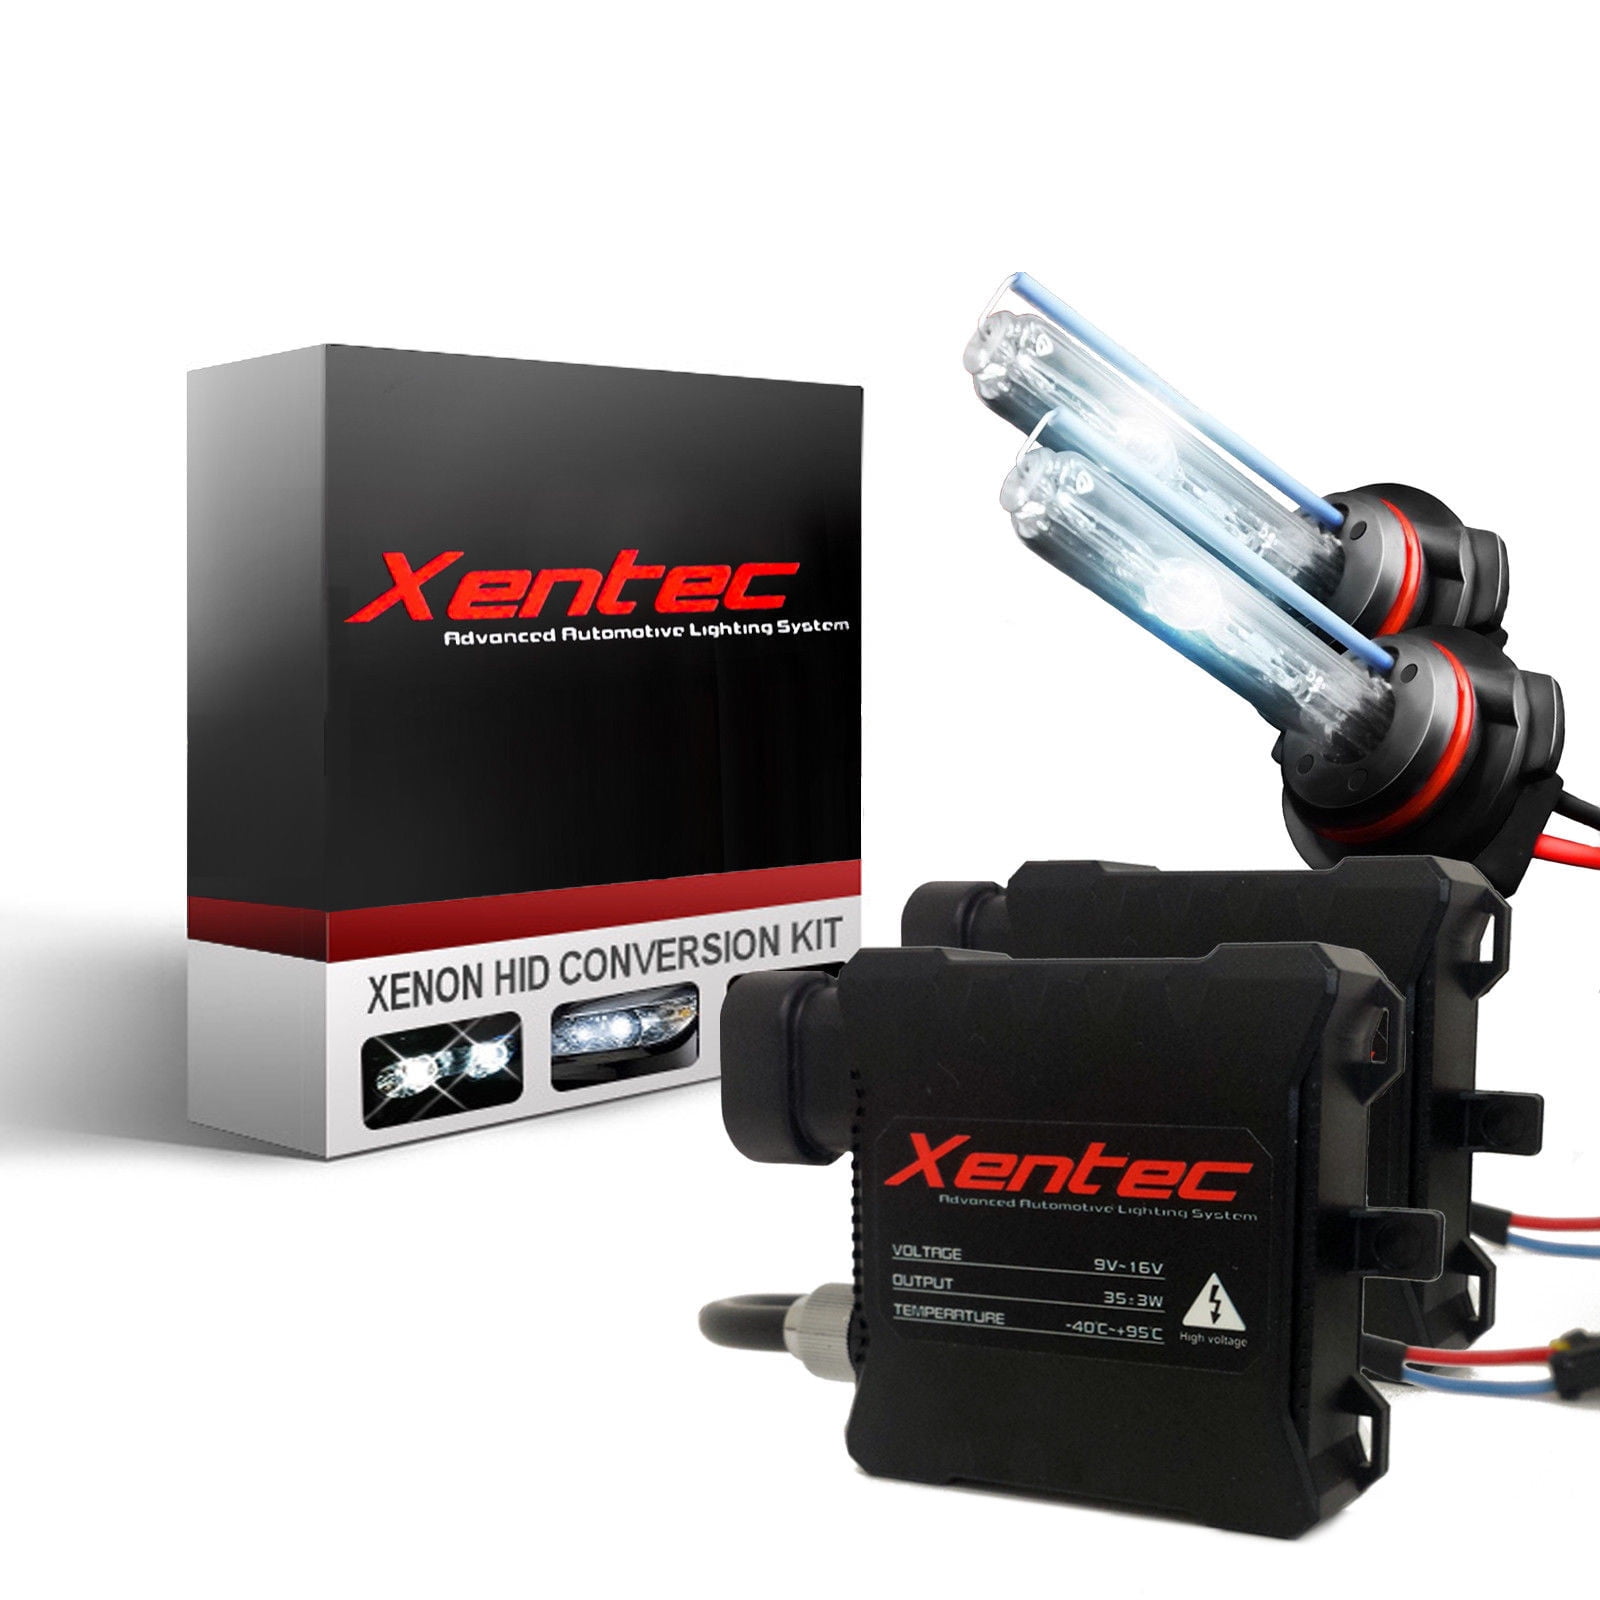 XENTEC LED HID Headlight Conversion kit H4 9003 6000K for 1997-1999 Toyota Camry